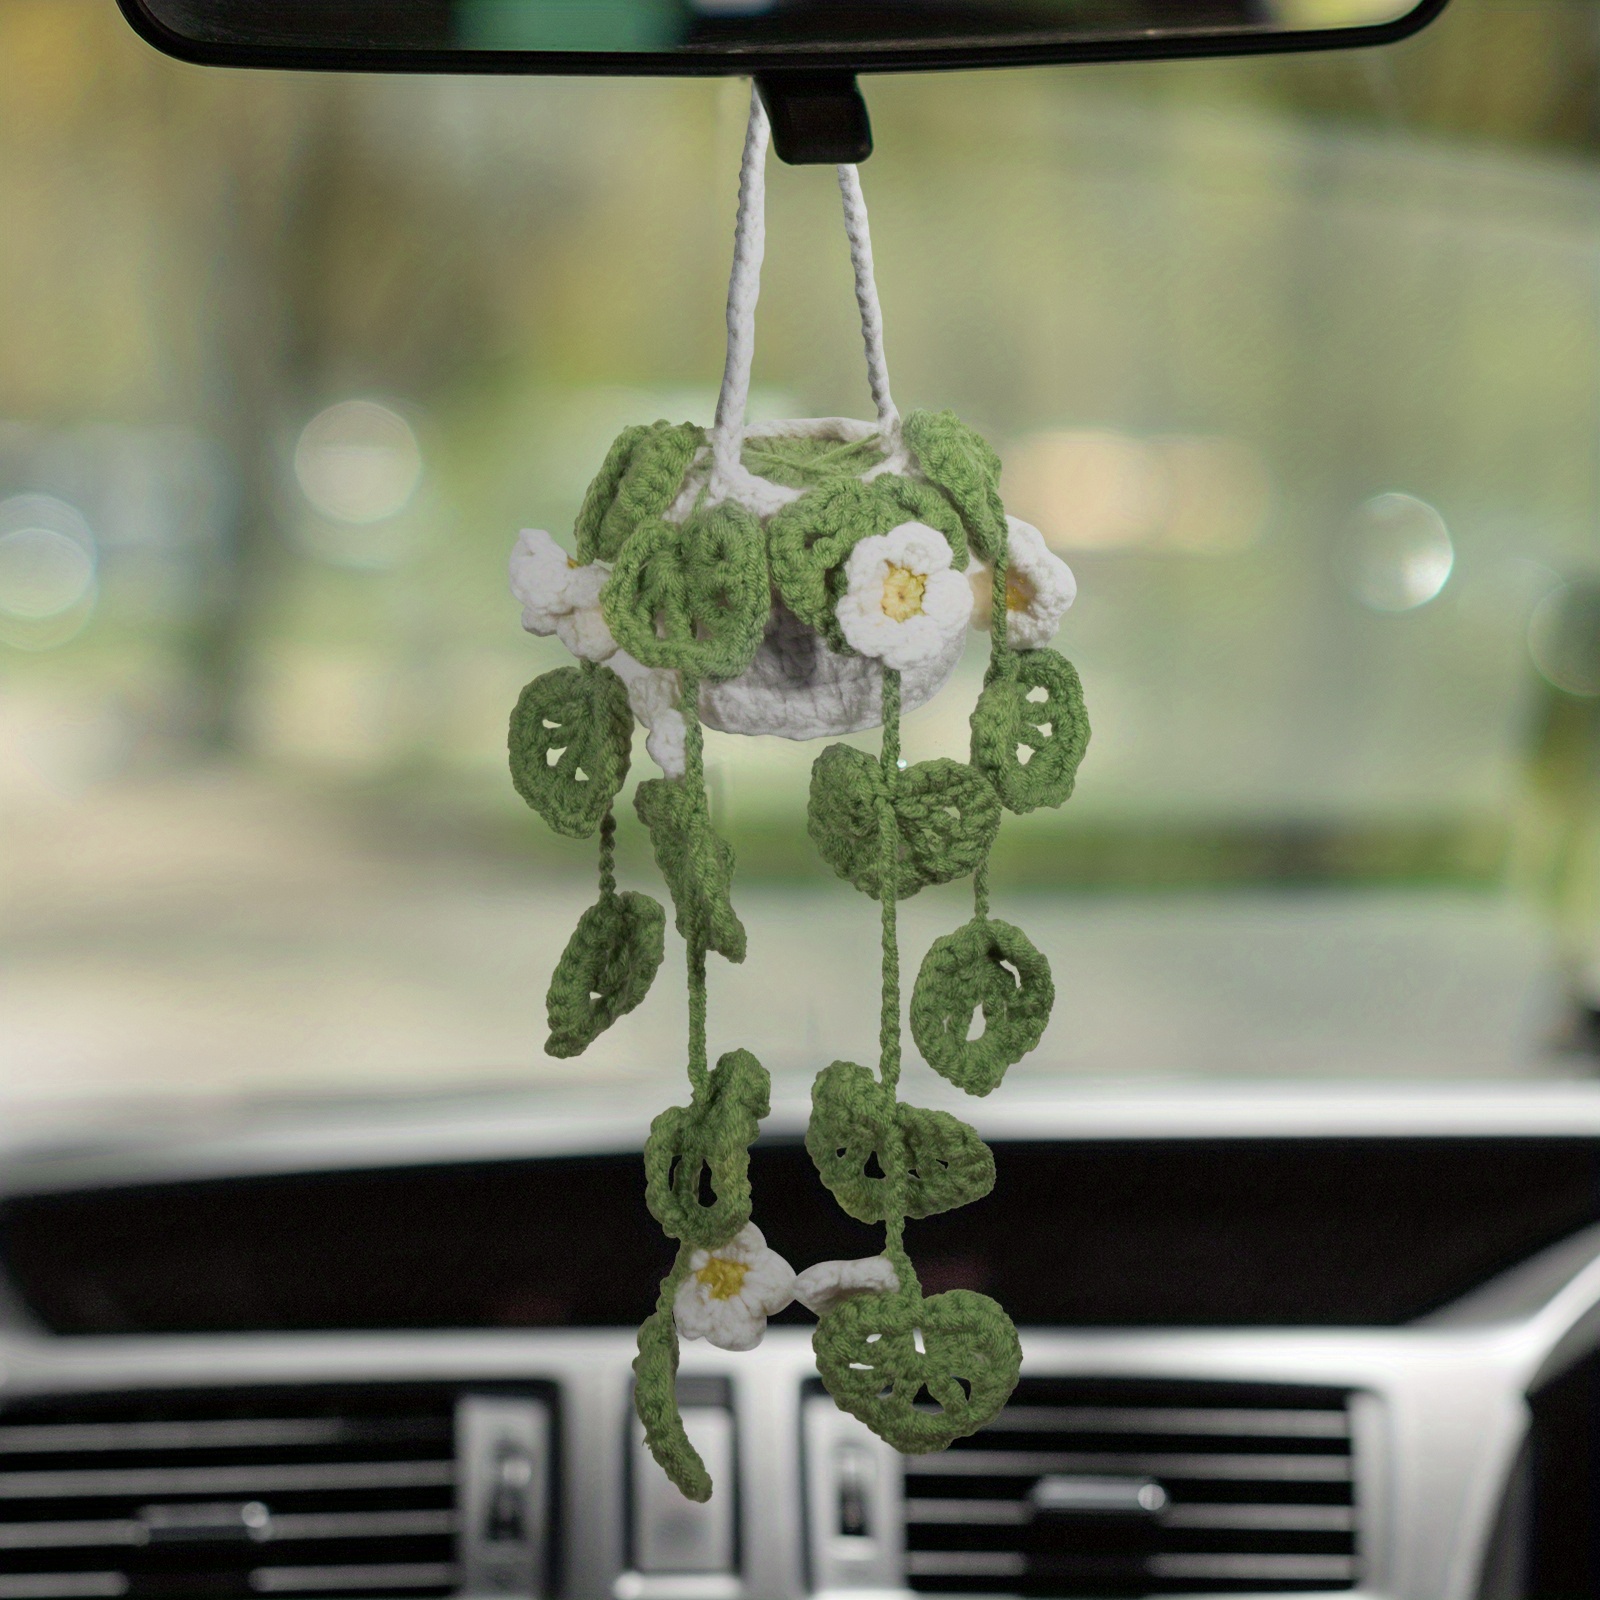 Boho Car Potted Plants Crochet Hanging Accessories For Car